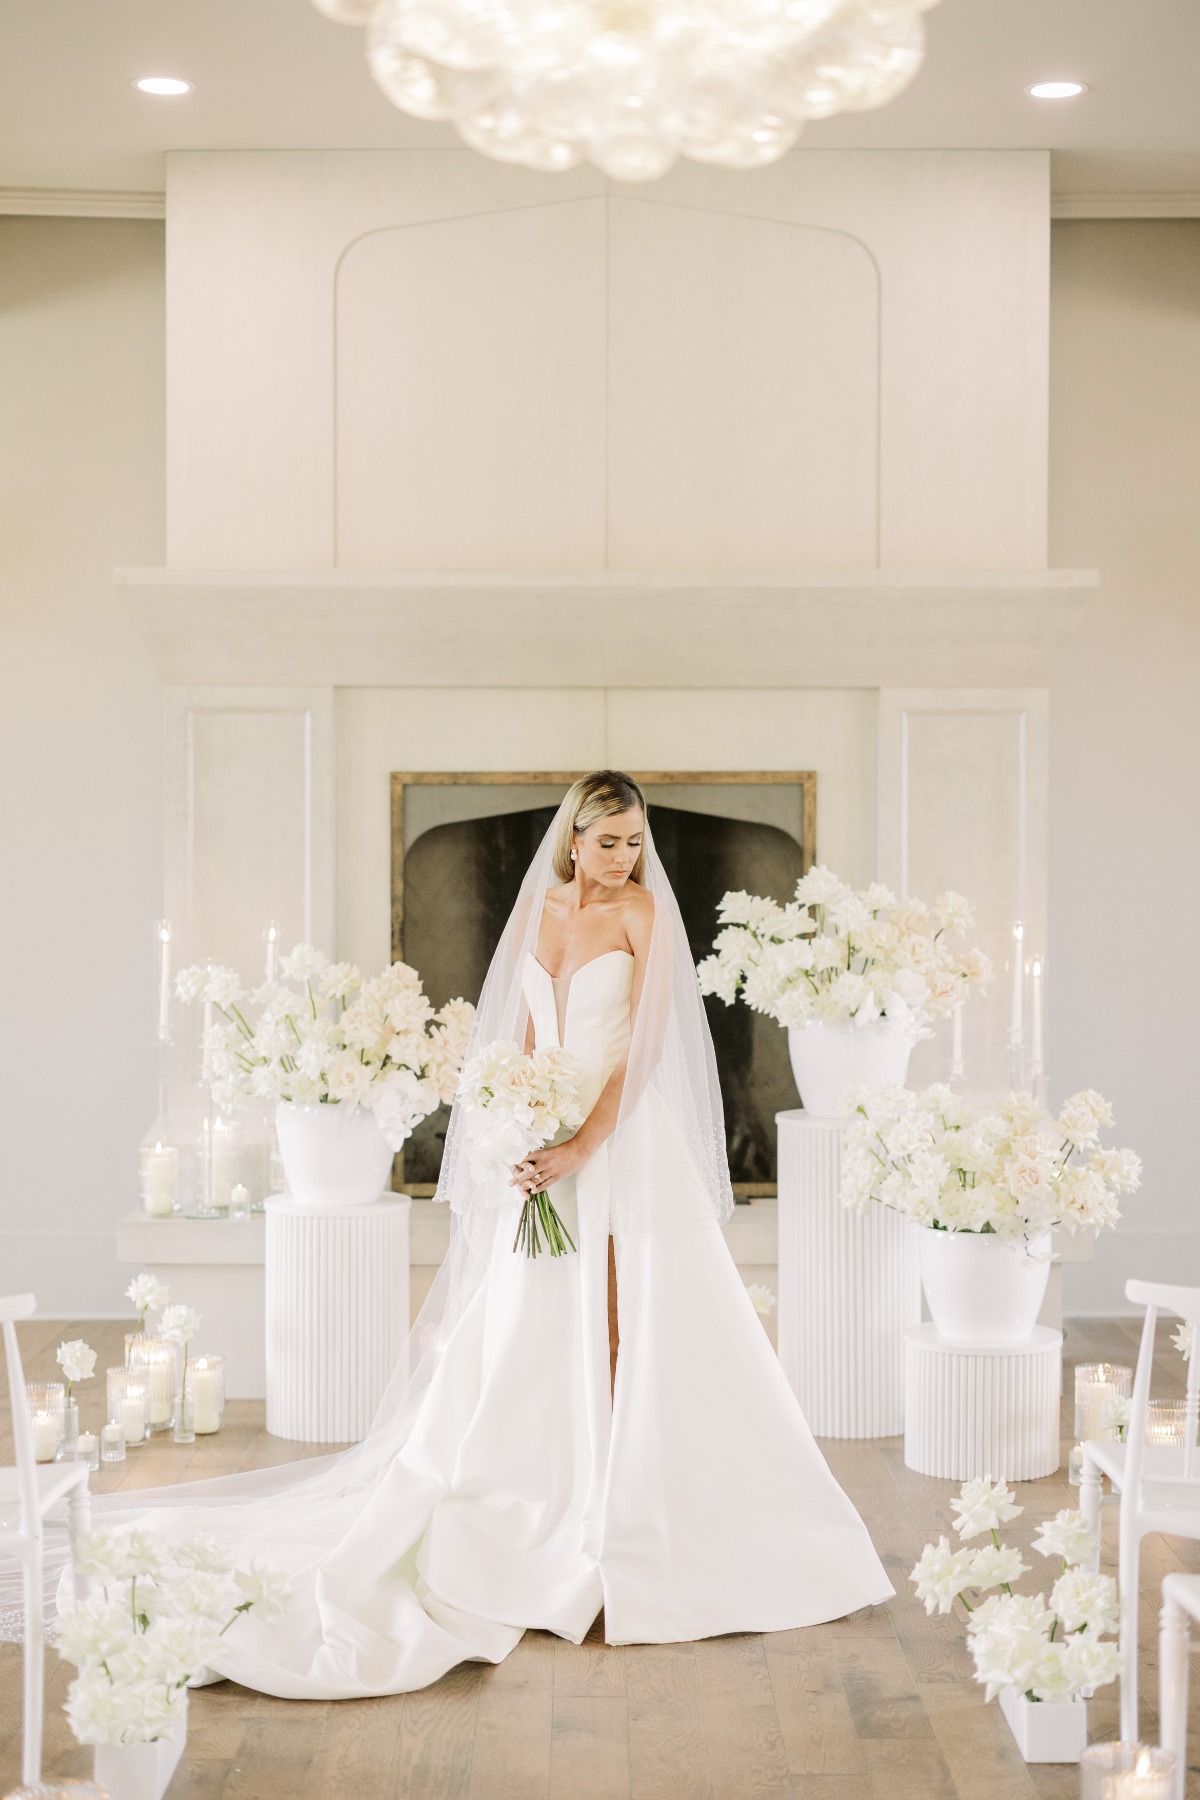 Elegant bride at white floral wedding ceremony in front of fireplace